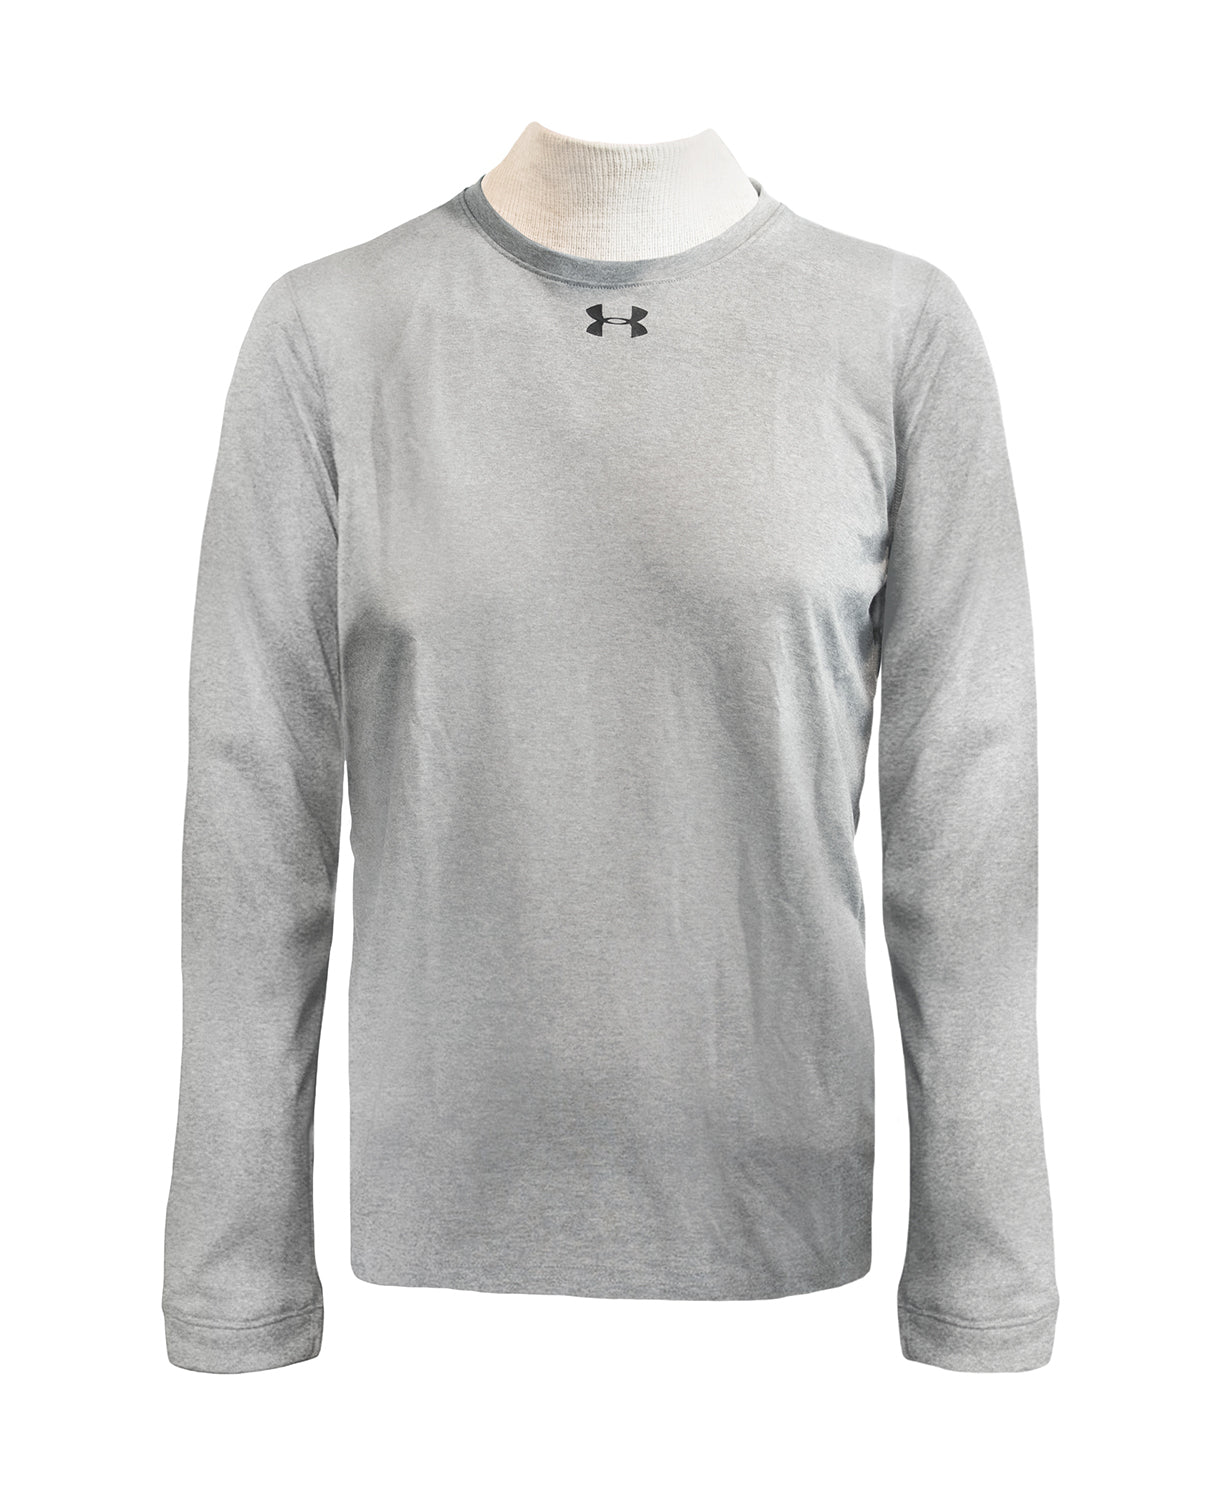 Adult Under Armour Grey Long Sleeve Warm-up Shirt – Coyote's Den